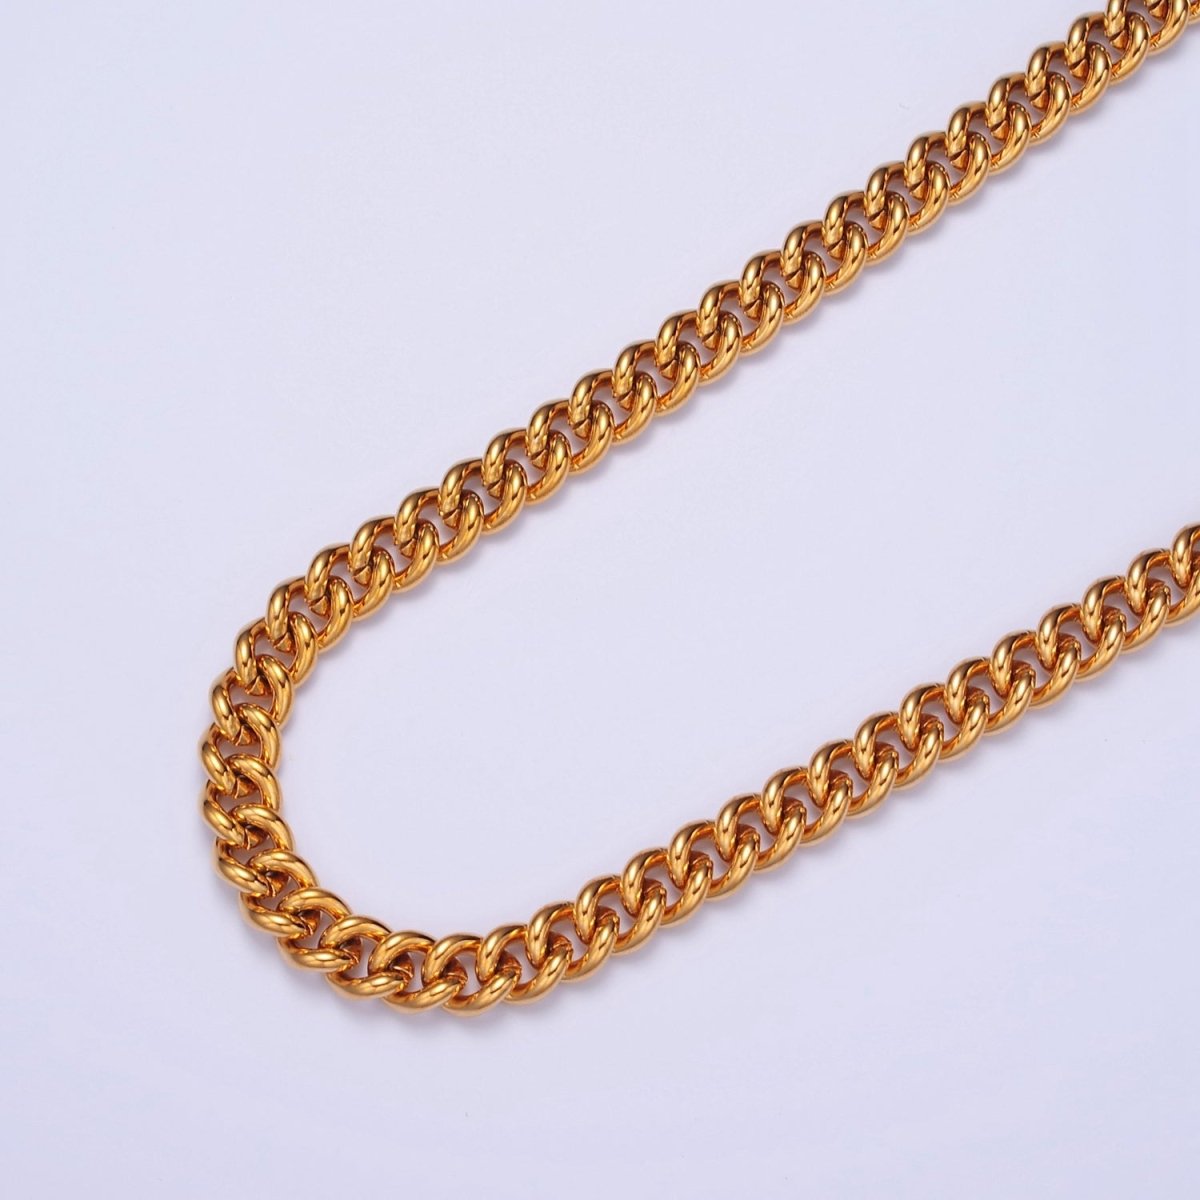 Thick Curb Link Unfinished Chain, 6mm 24k Gold Filled Chain 19.5 inch long | WA-1394 Clearance Pricing - DLUXCA